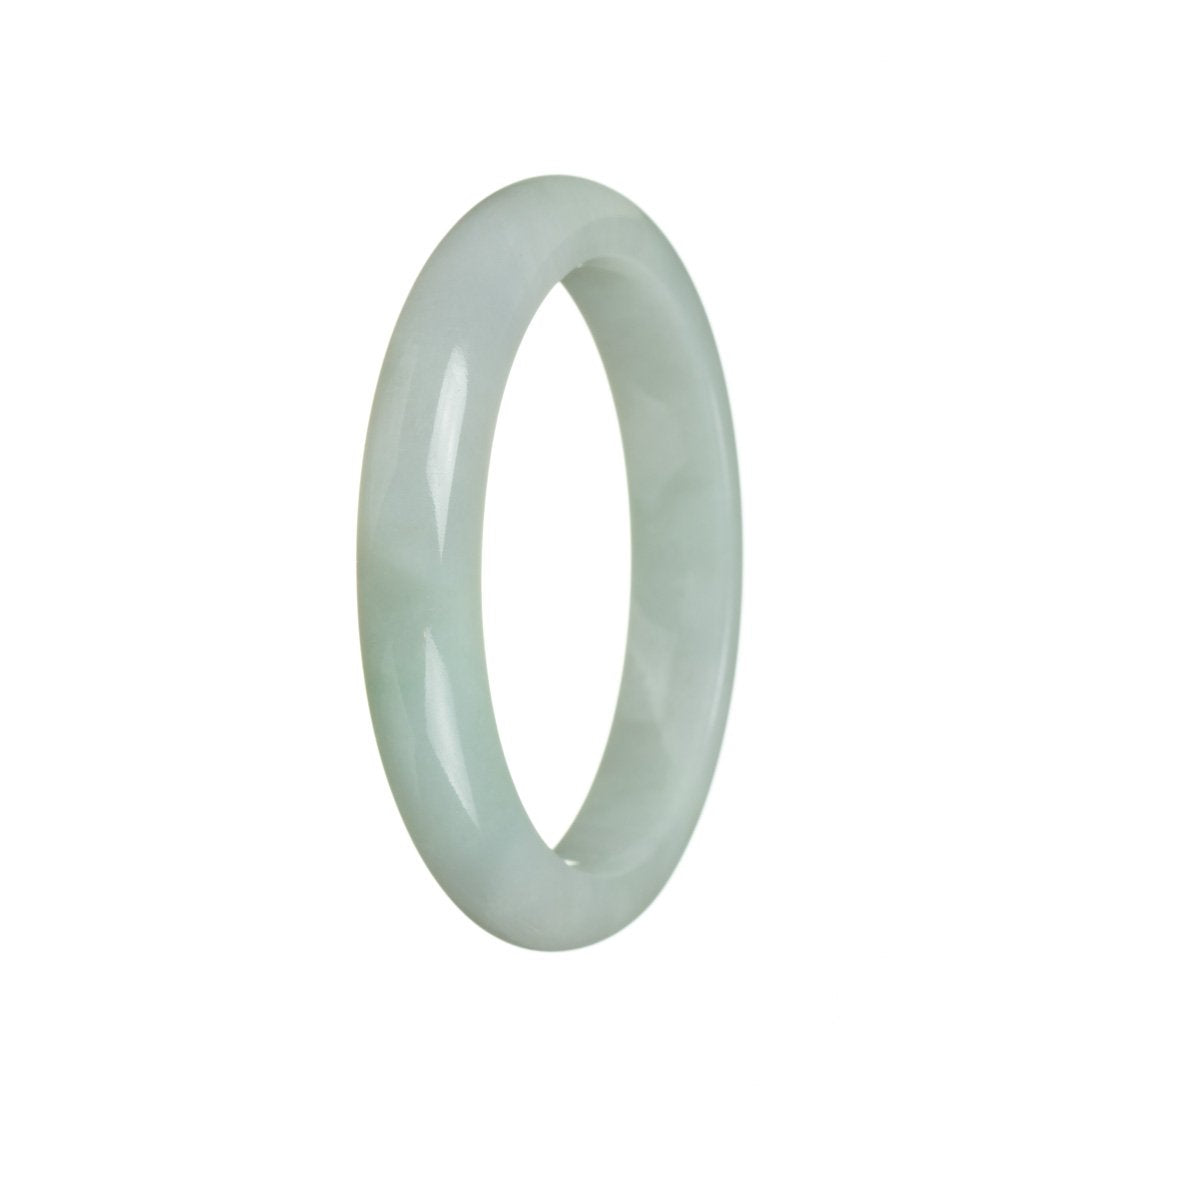 An elegant light green jade bracelet, certified Type A, featuring a semi-round shape and measuring 54mm in size. Crafted by MAYS™.